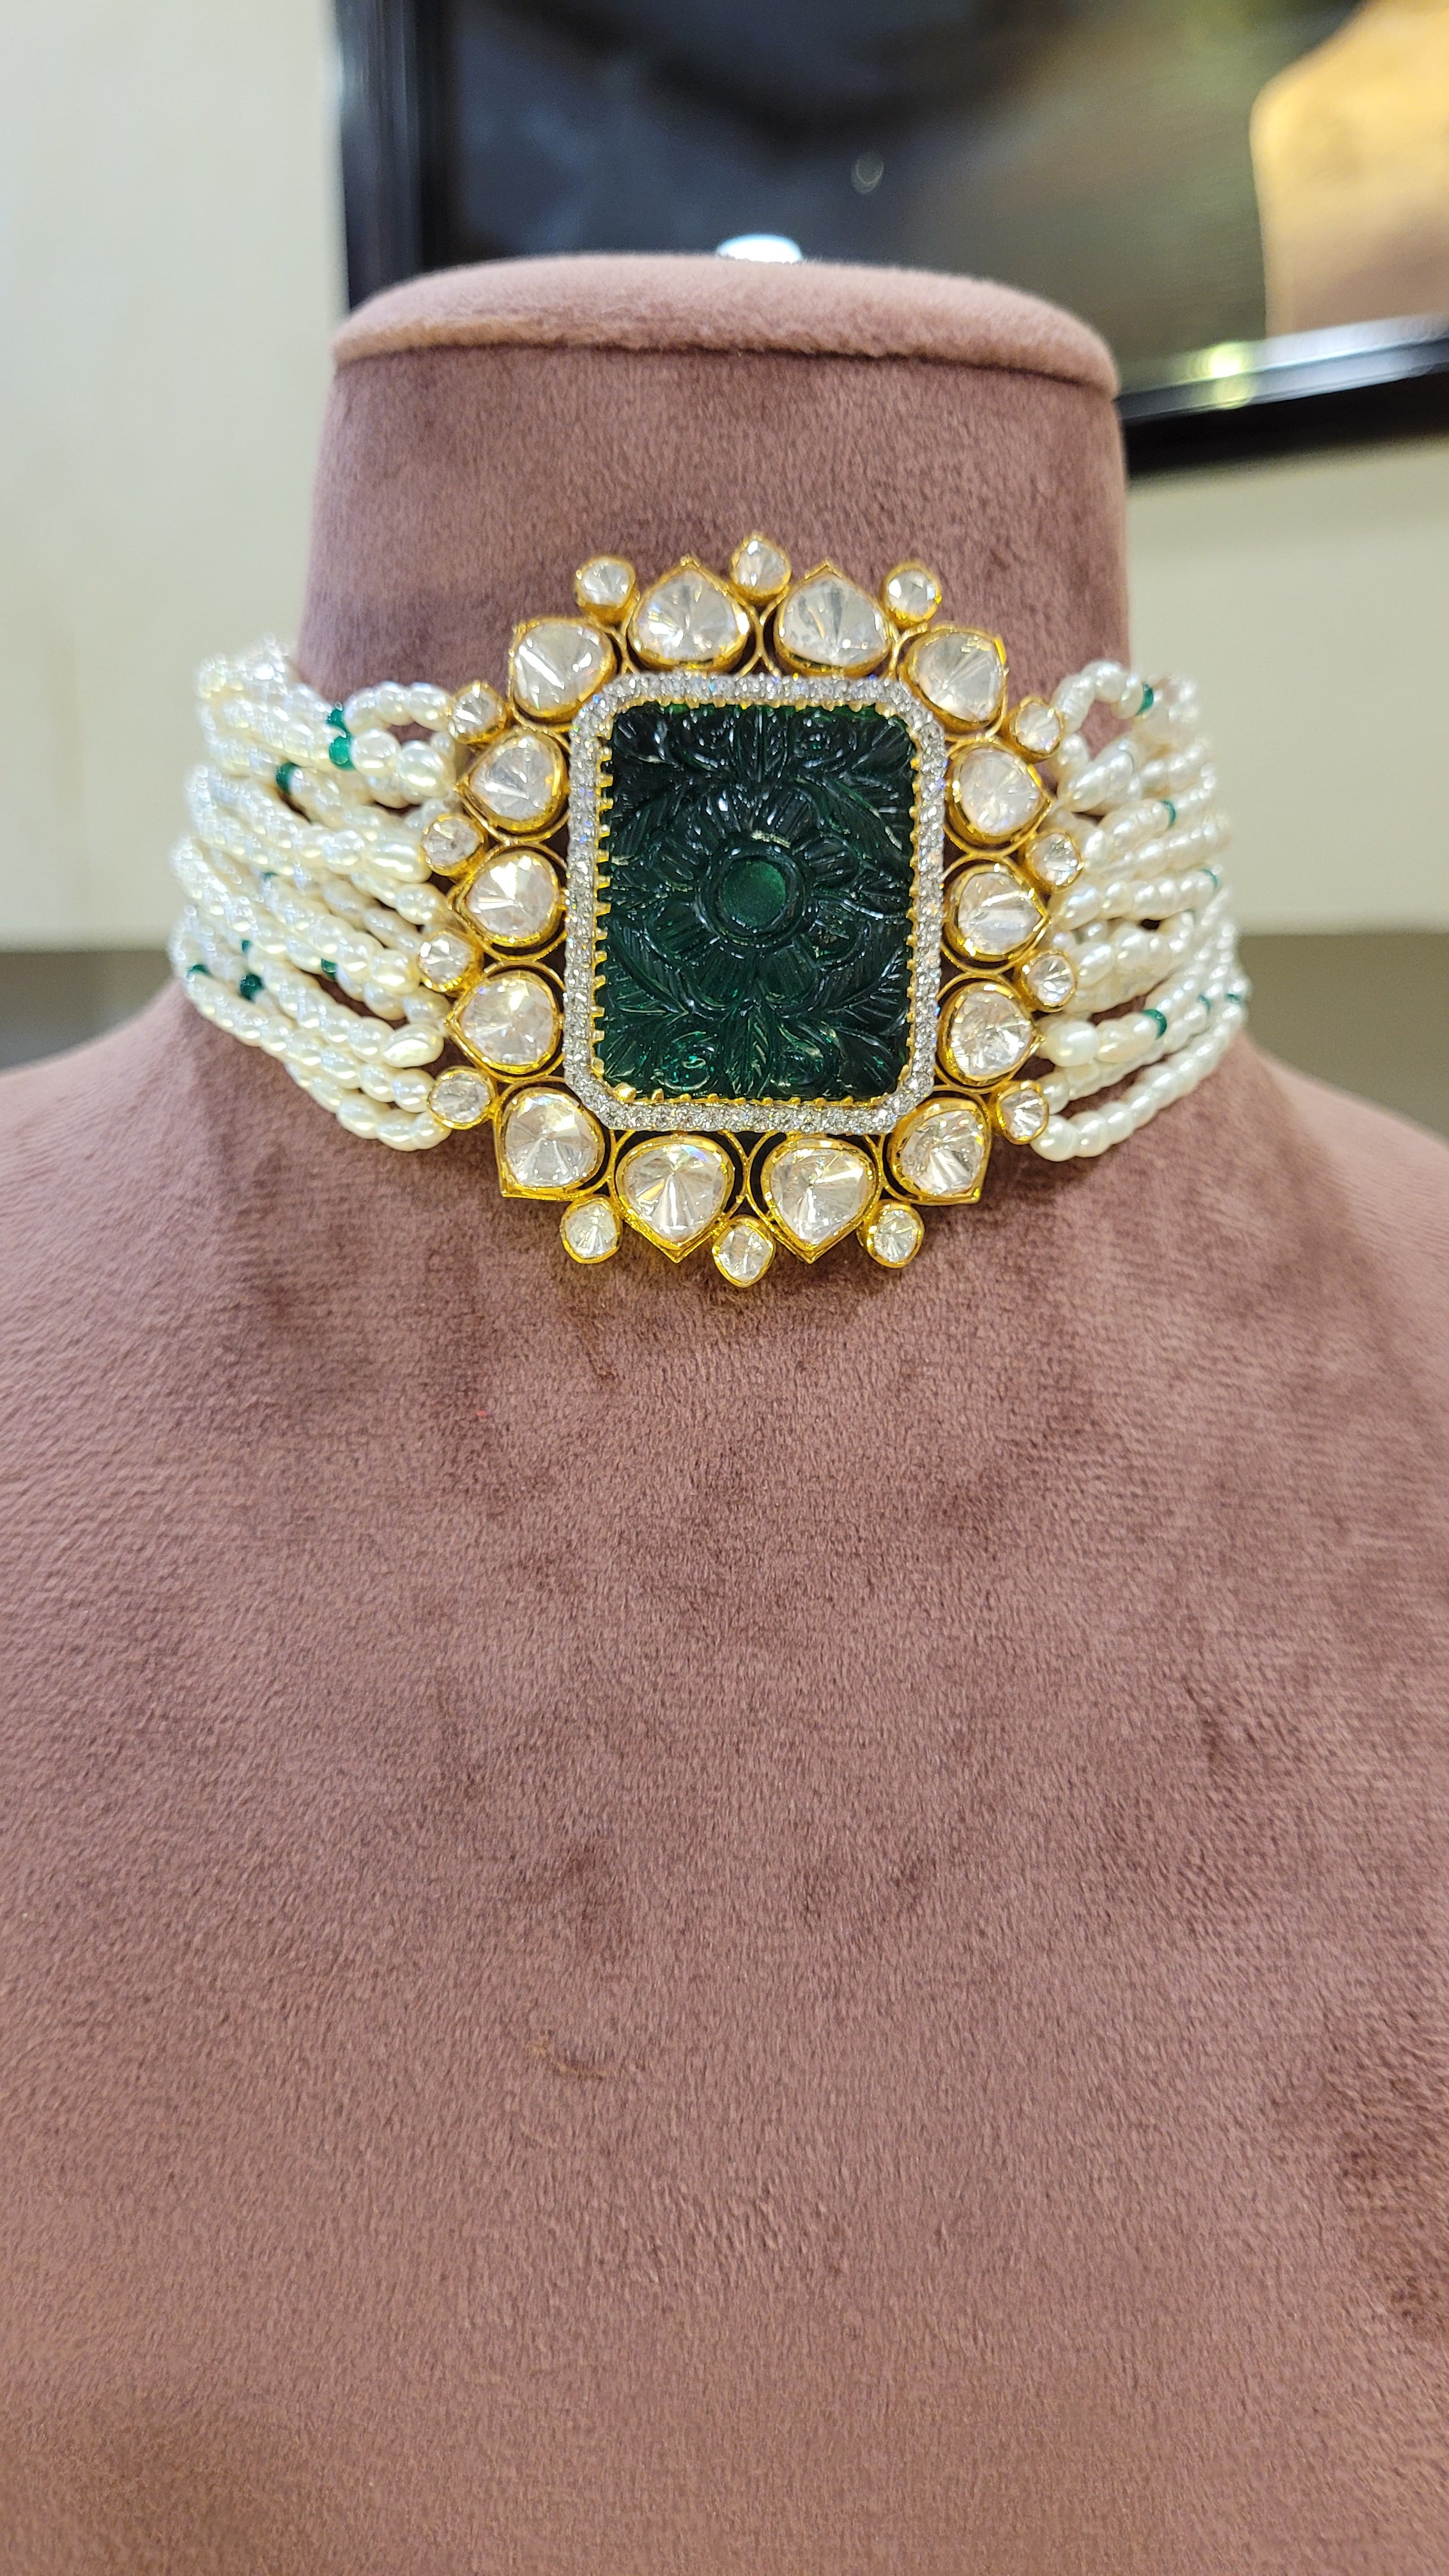 Bridal Emerald Necklace With Earrings - Gleam Jewels